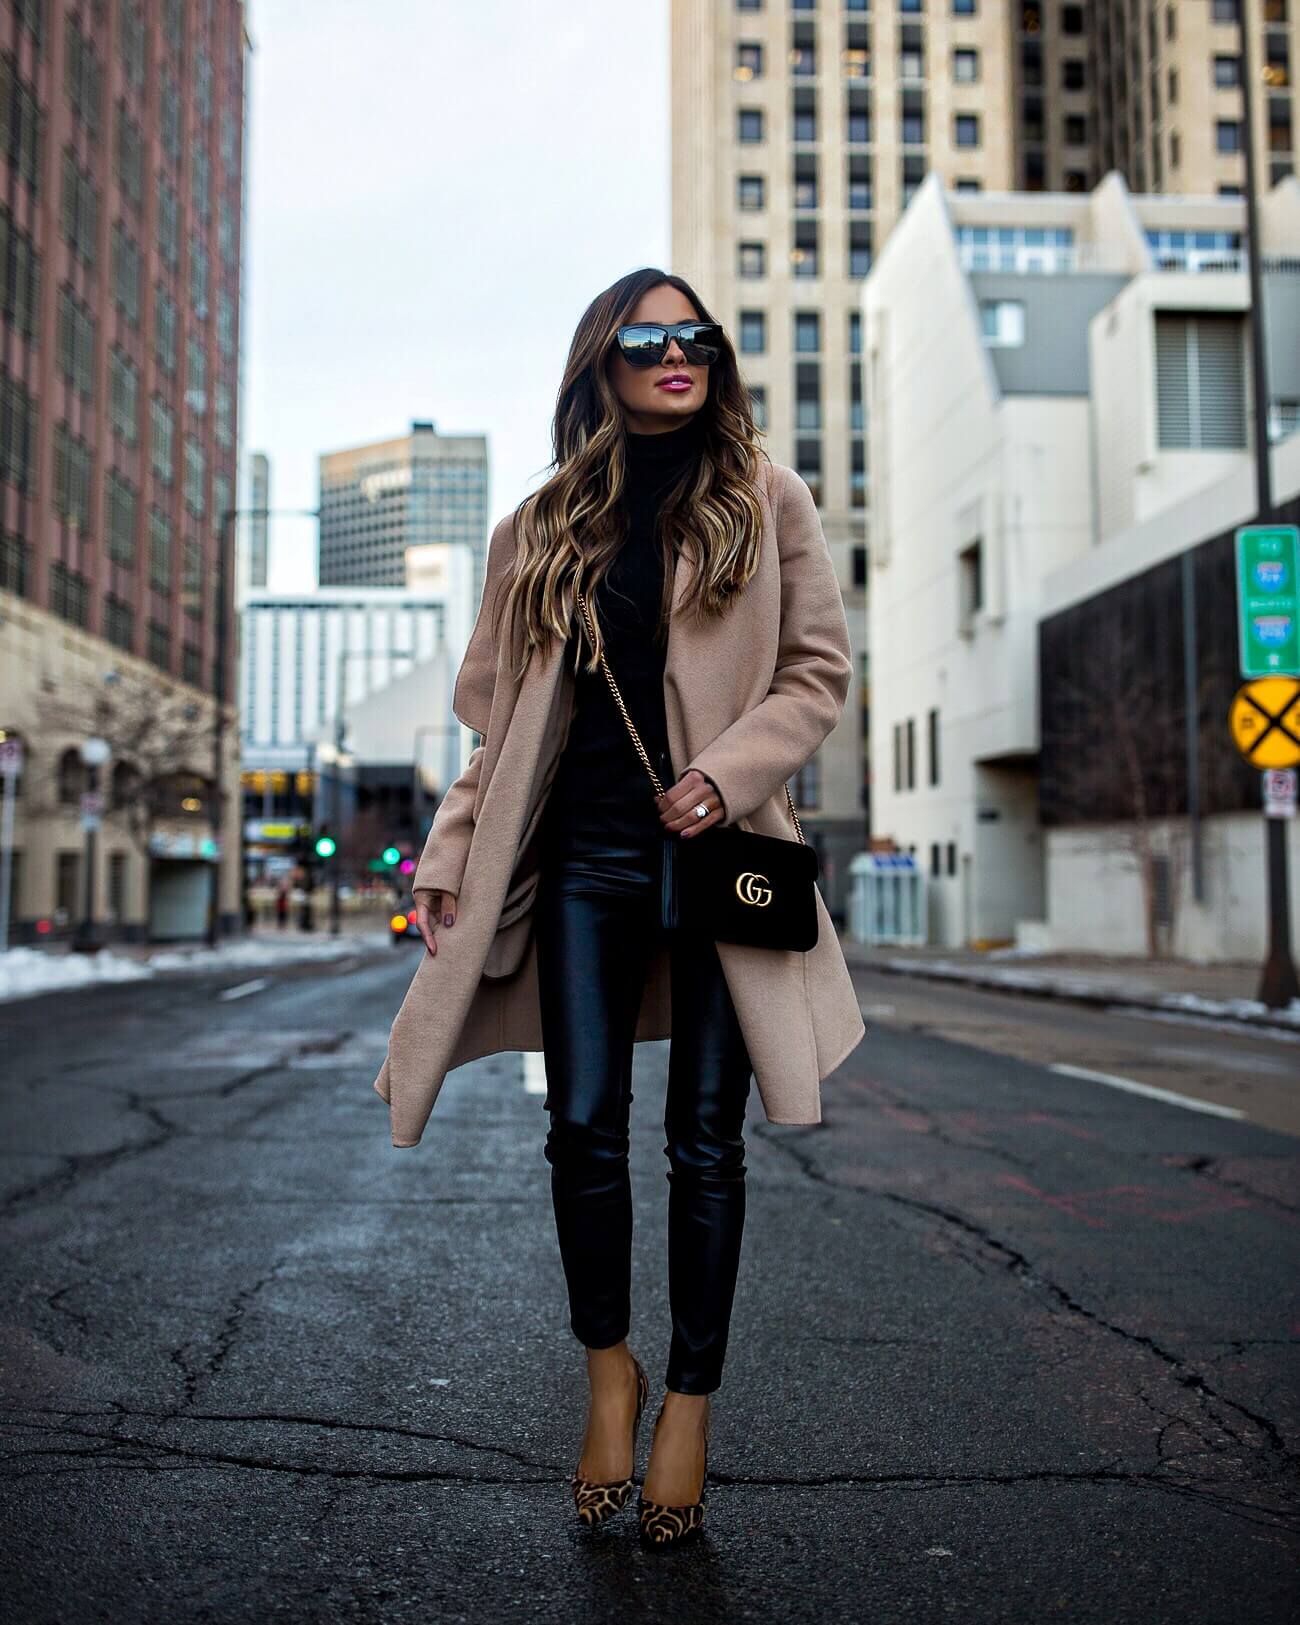 fashion blogger mia mia mine wearing a camel coat and black faux leather blank denim pants from shopbop with christian louboutin leopard calf hair pumps